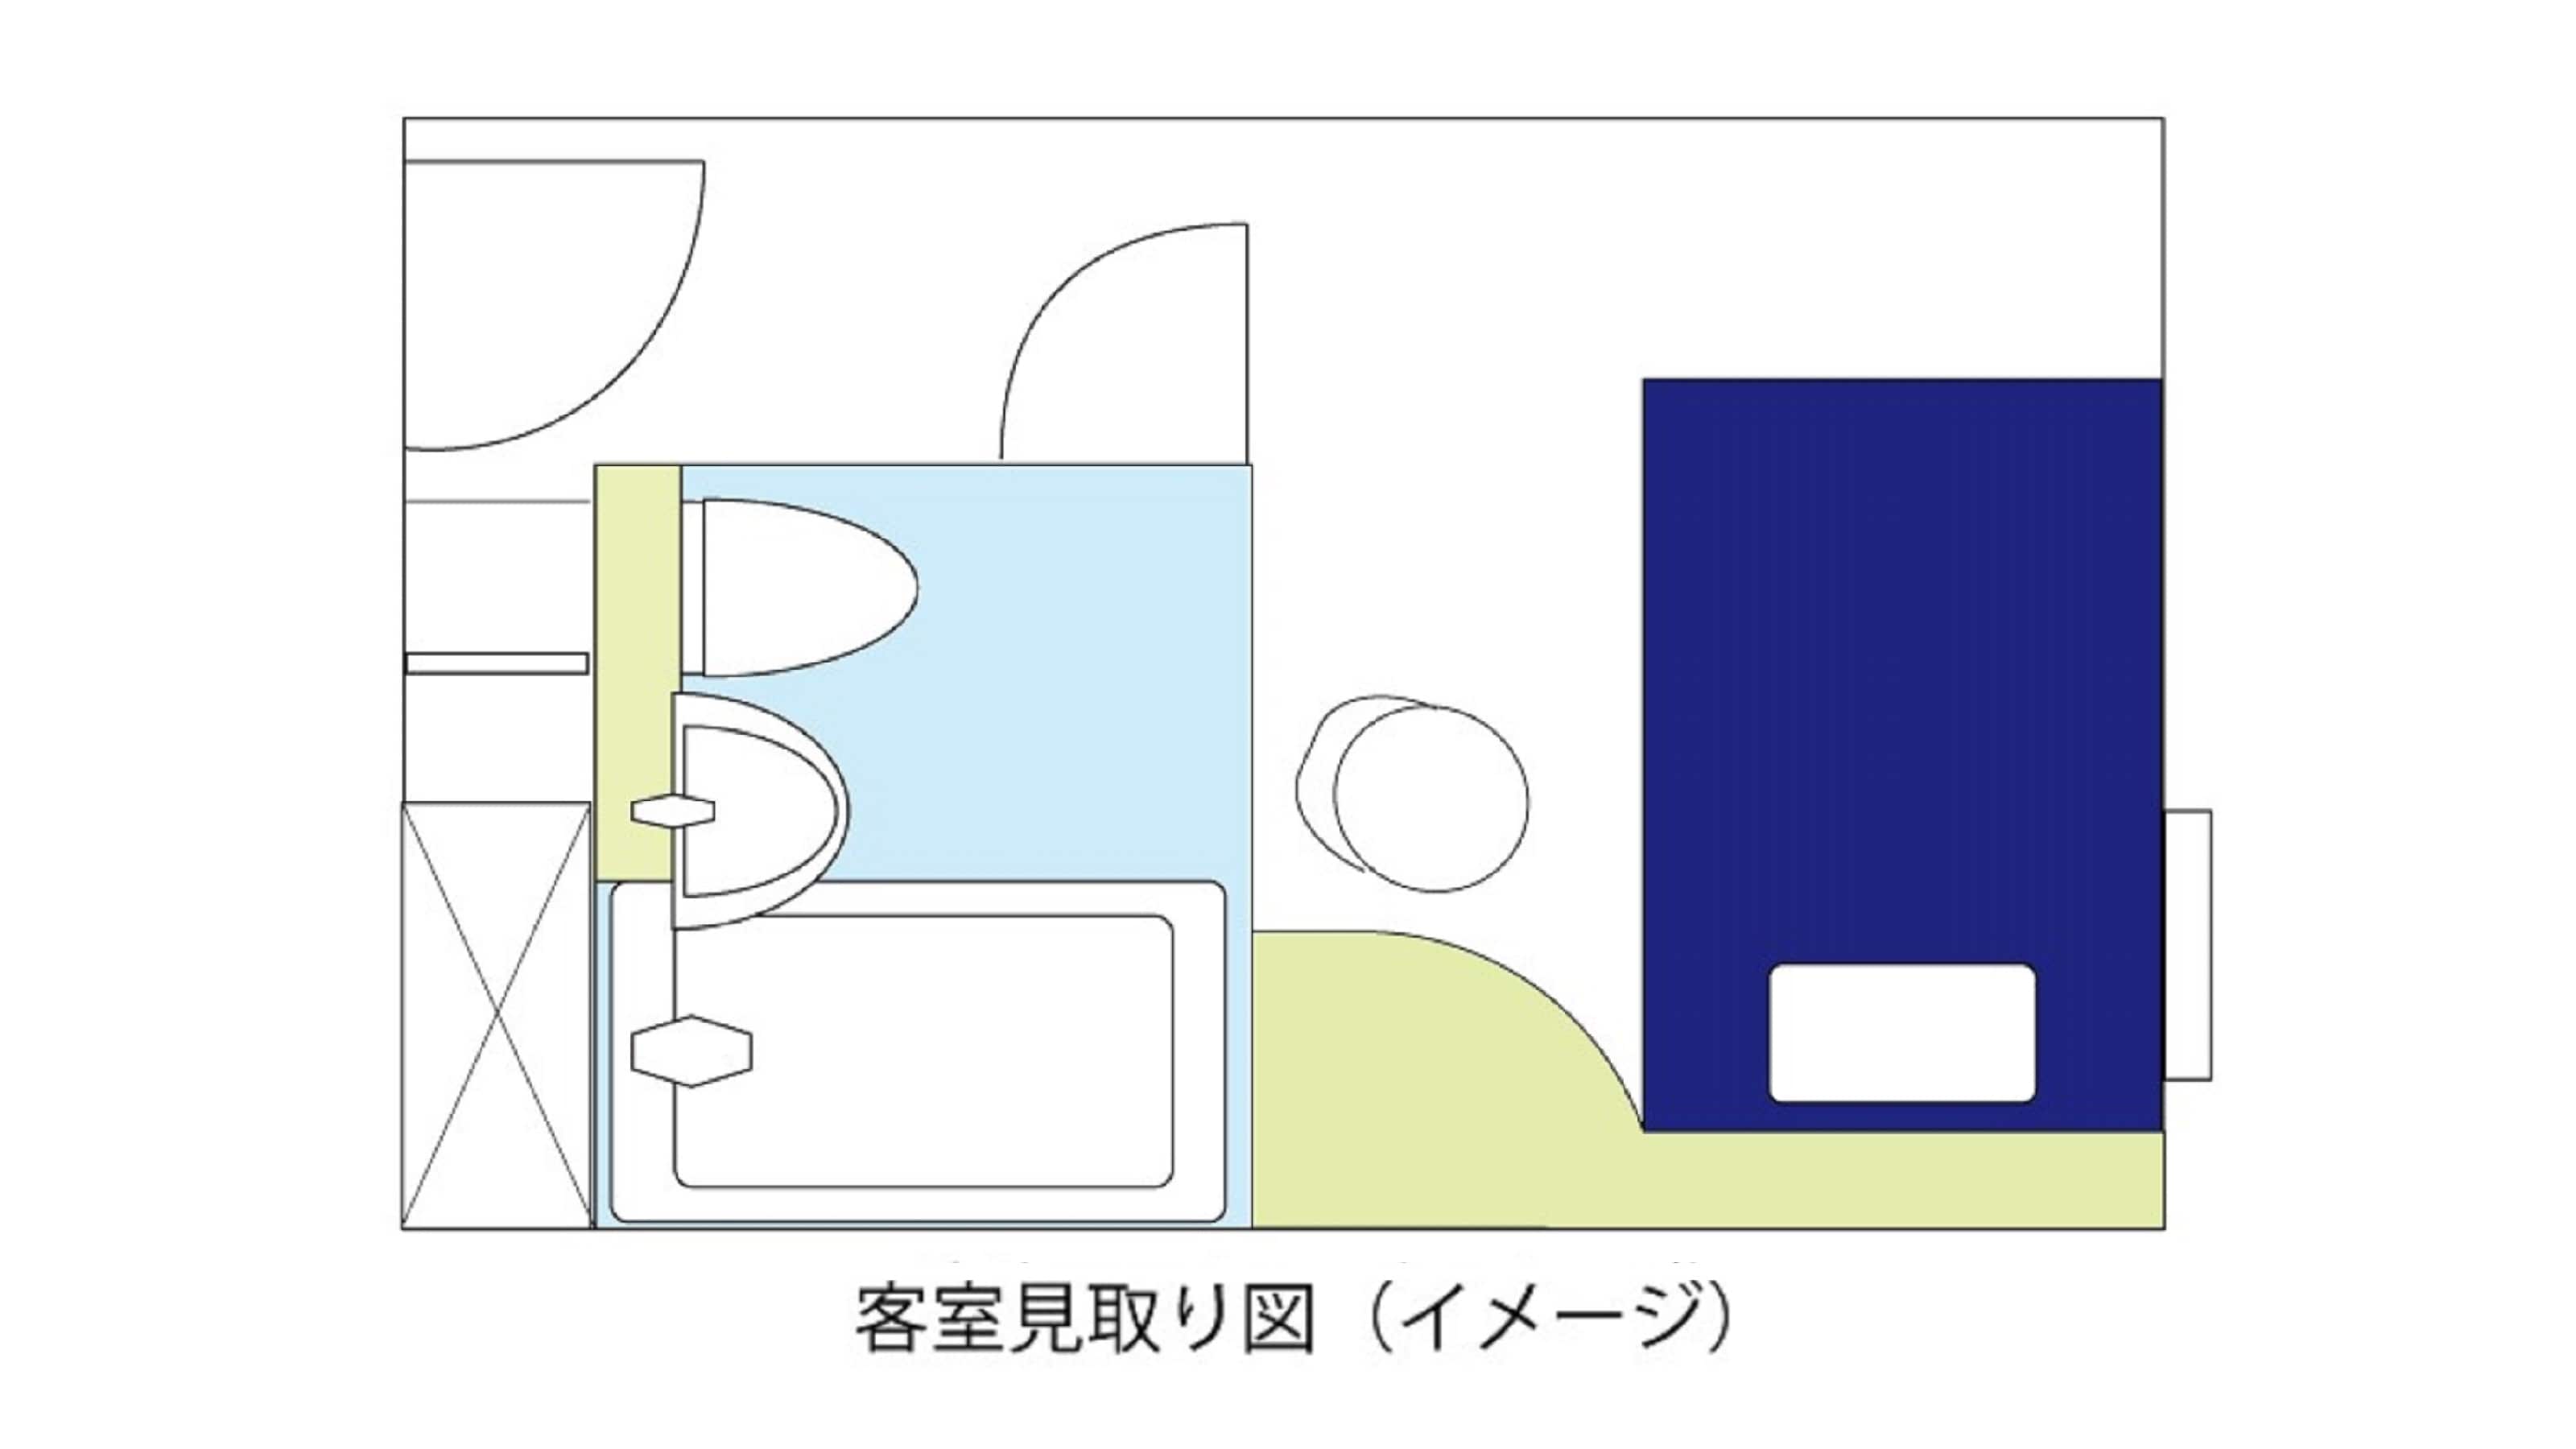 Superior double 13 square meters / 140 cm wide bed layout